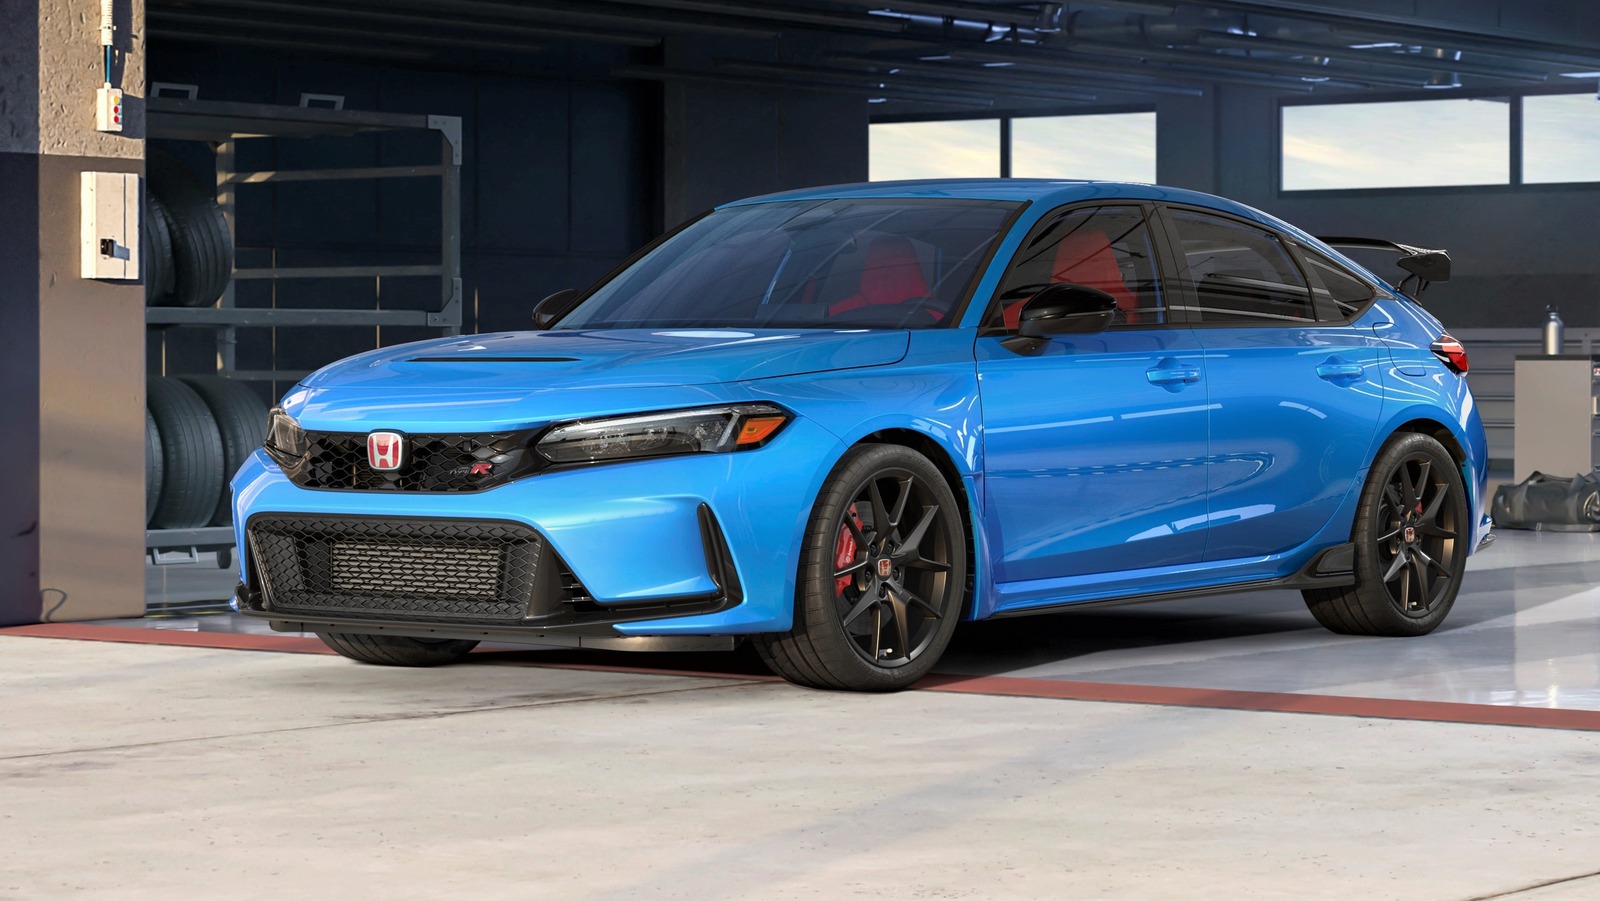 2023 Honda Civic Type R Price Revealed And We're Shocked